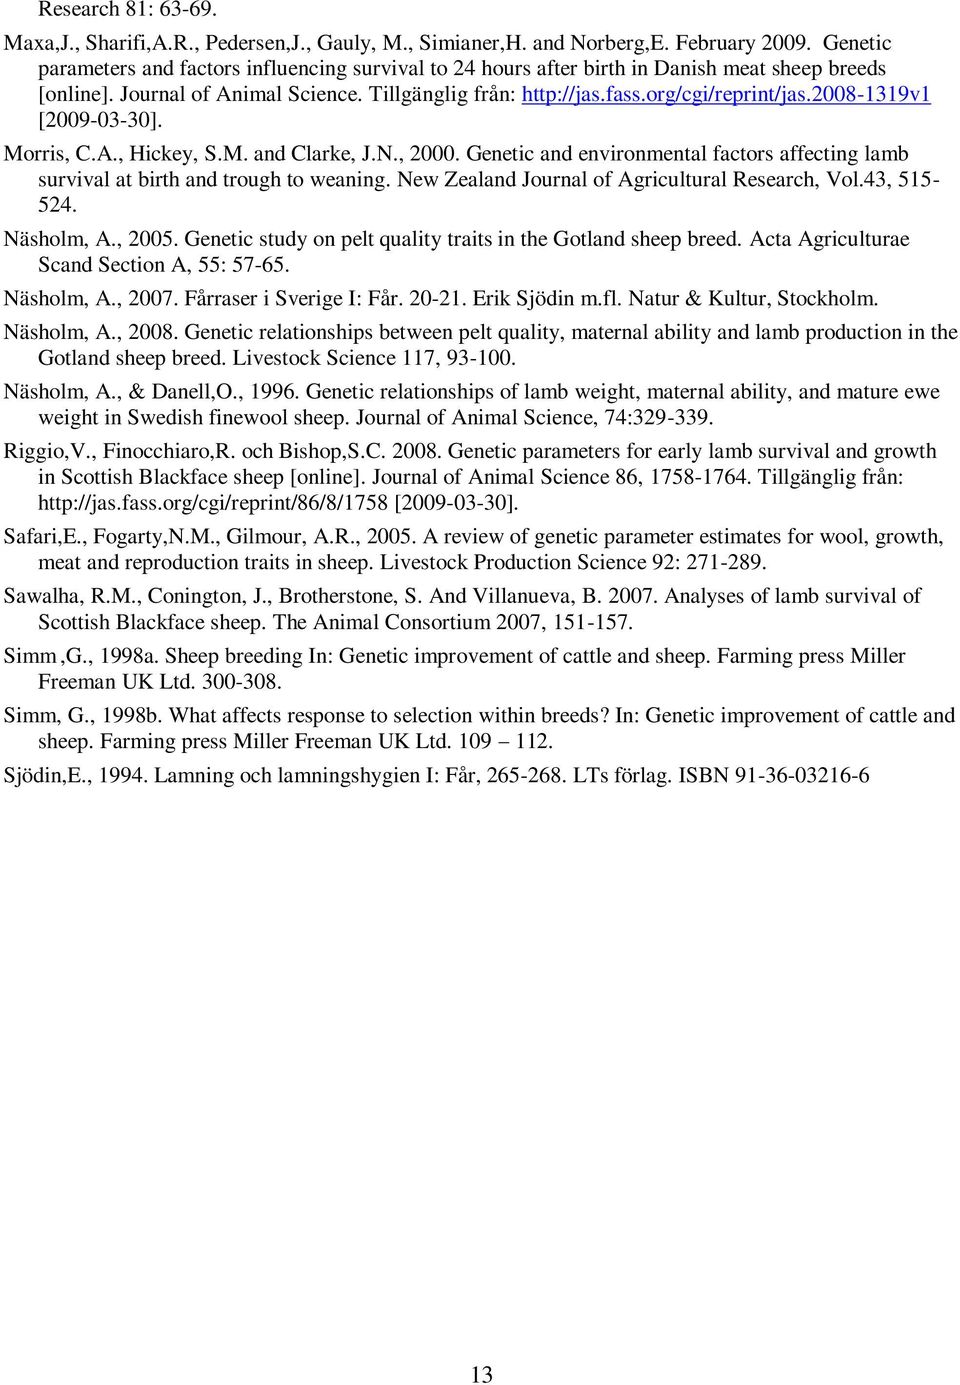 2008-1319v1 [2009-03-30]. Morris, C.A., Hickey, S.M. and Clarke, J.N., 2000. Genetic and environmental factors affecting lamb survival at birth and trough to weaning.